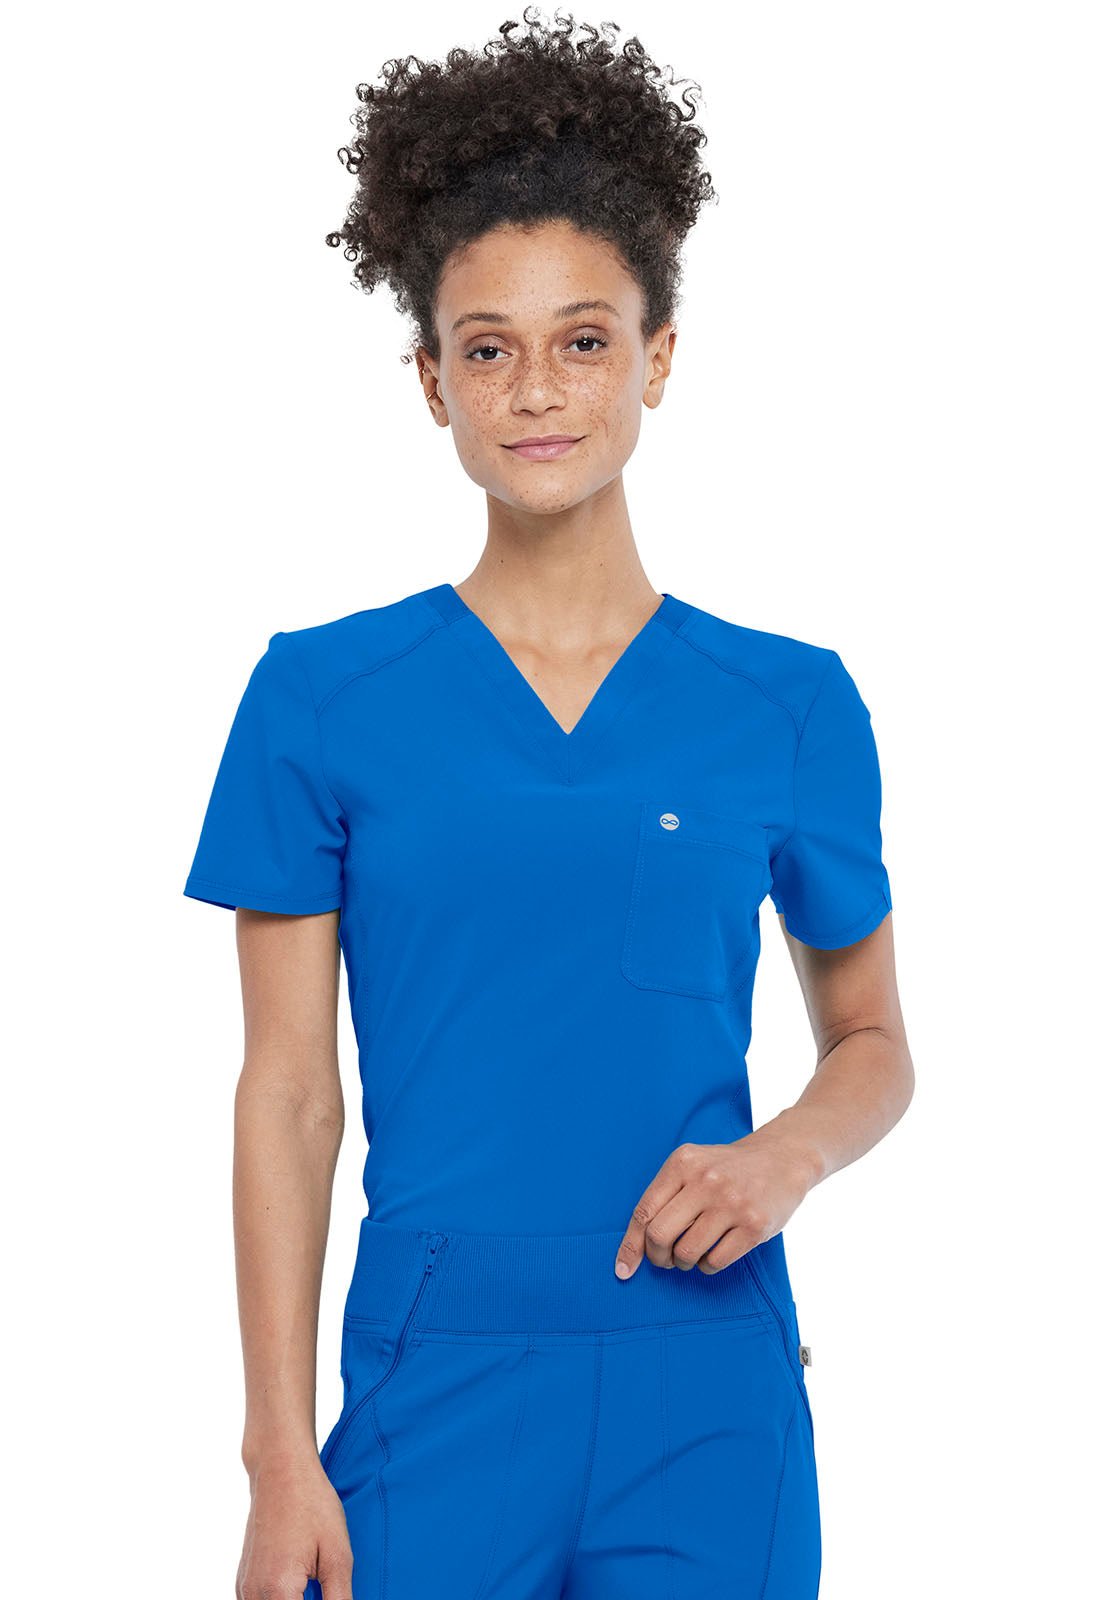 Royal Blue Infinity Scrubs Tuckable V-Neck Top- Front View